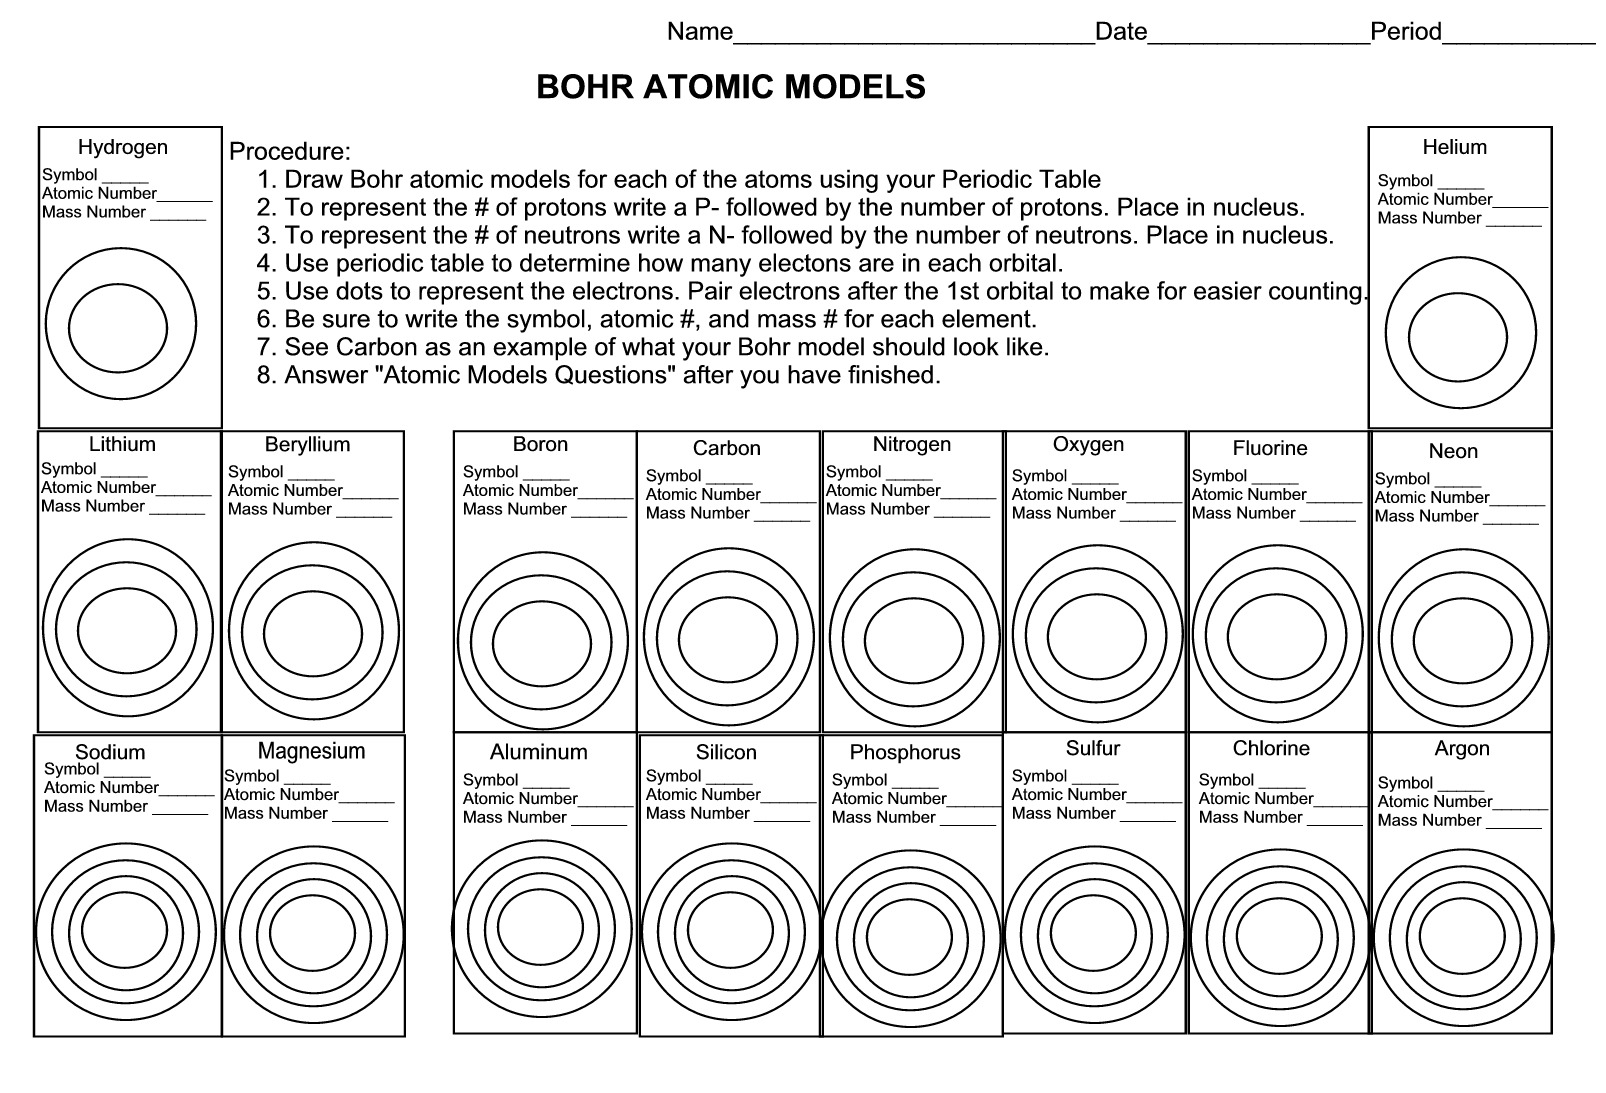 Science and Math 11 - SCIENCE AND MATH WITH MS. SMYTH For Bohr Atomic Models Worksheet